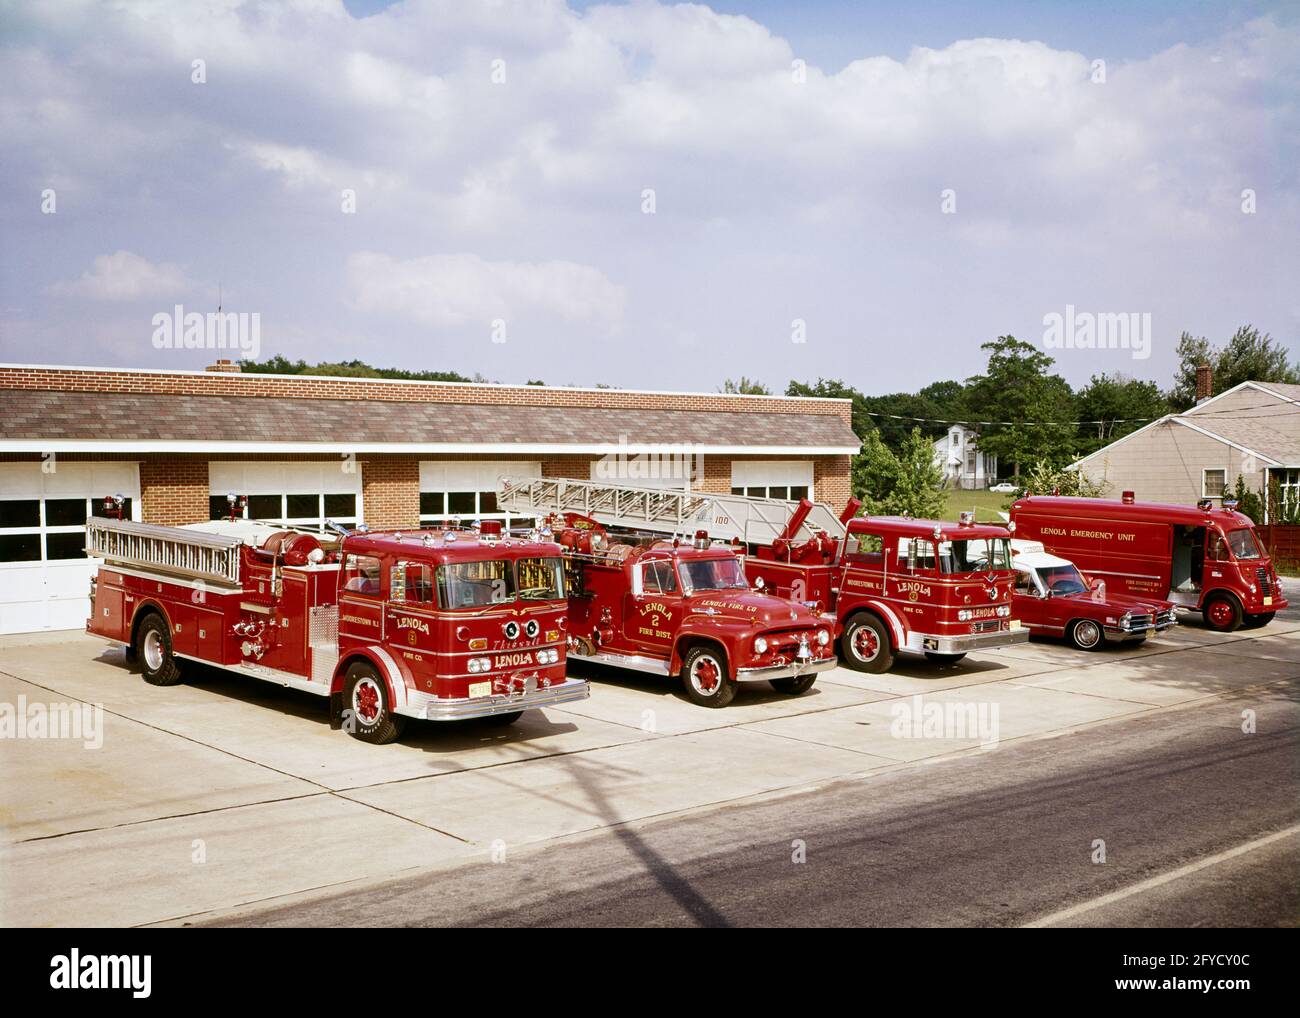 1960s 5 EMERGENCY VEHICLES TRUCKS INCLUDING AN AMBULANCE IN FRONT OF THE VOLUNTEER FIRE DEPARTMENT BUILDING IN LENOLA NJ USA - kf6289 HAR001 HARS WIDE ANGLE FIREMAN DISASTER ADVENTURE PROTECTION STRENGTH COURAGE EXTERIOR KNOWLEDGE POWERFUL PROGRESS PRIDE ON AUTHORITY NJ OCCUPATIONS FIREMEN CONCEPTUAL STYLISH SUPPORT VEHICLES NEW JERSEY SMALL TOWN COOPERATION FIREFIGHTERS FIRES GROWTH TOGETHERNESS FIRE DEPARTMENT HAR001 INCLUDING OLD FASHIONED Stock Photo